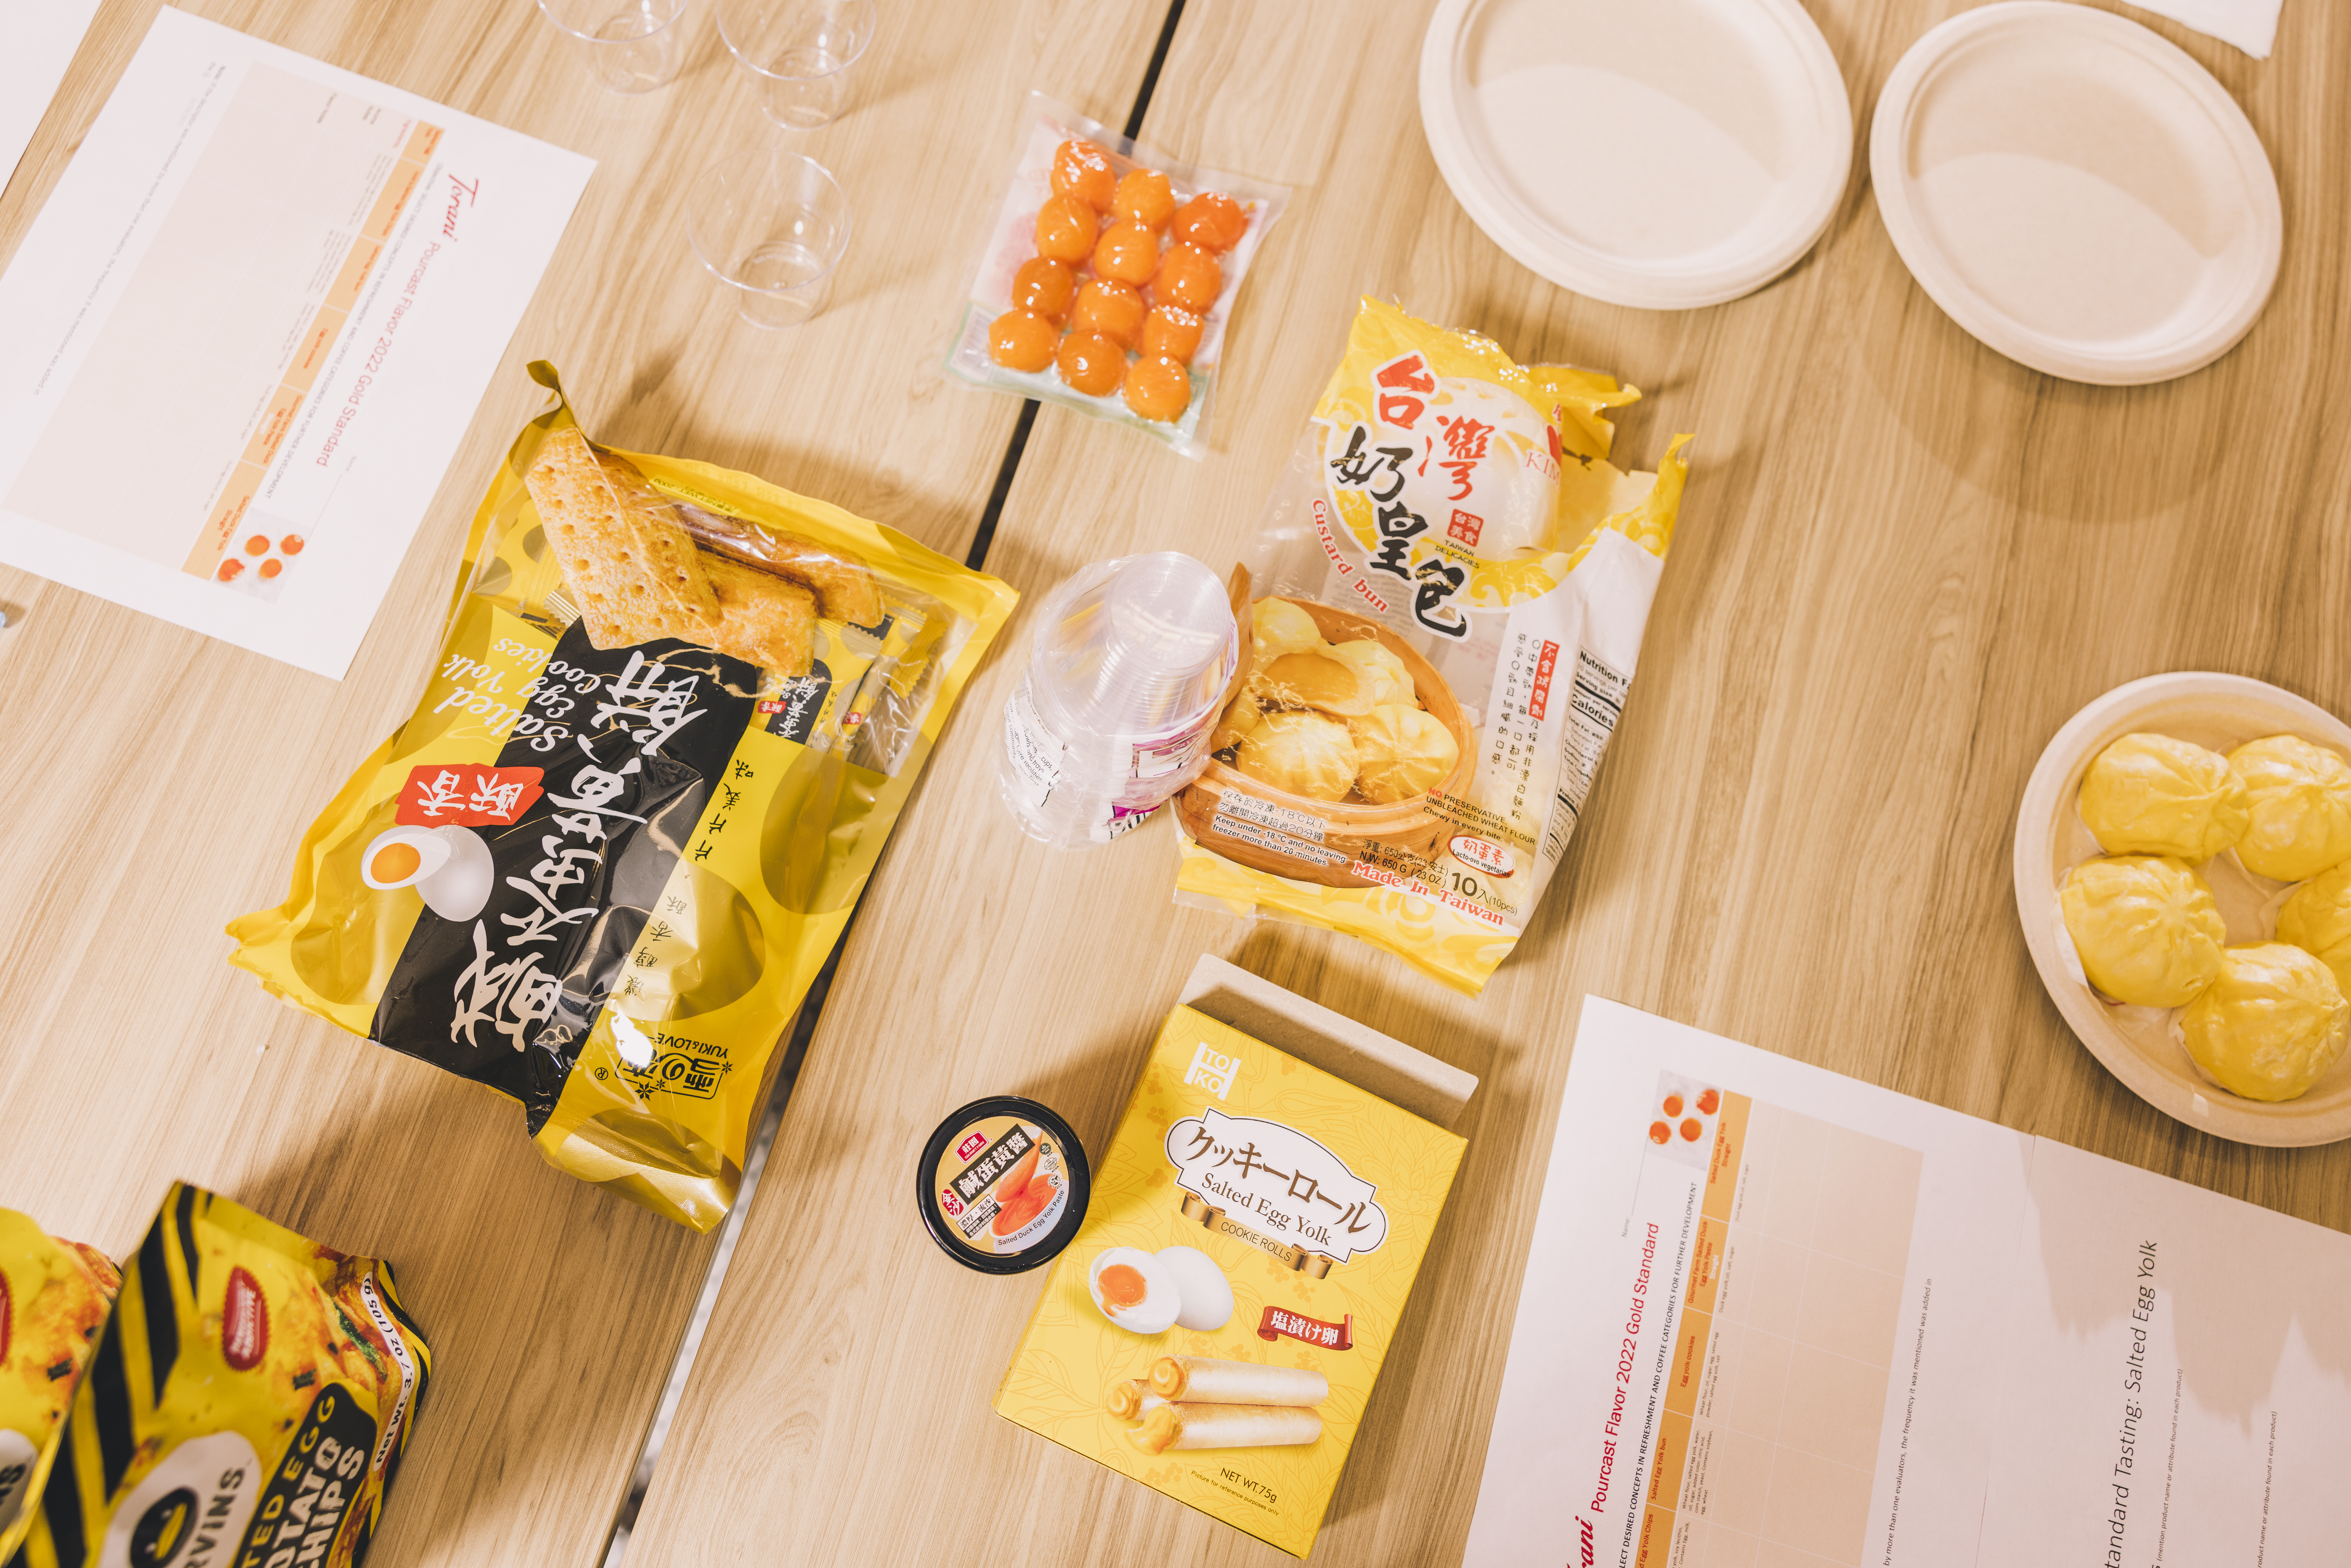 different salted egg yolk products for tasting